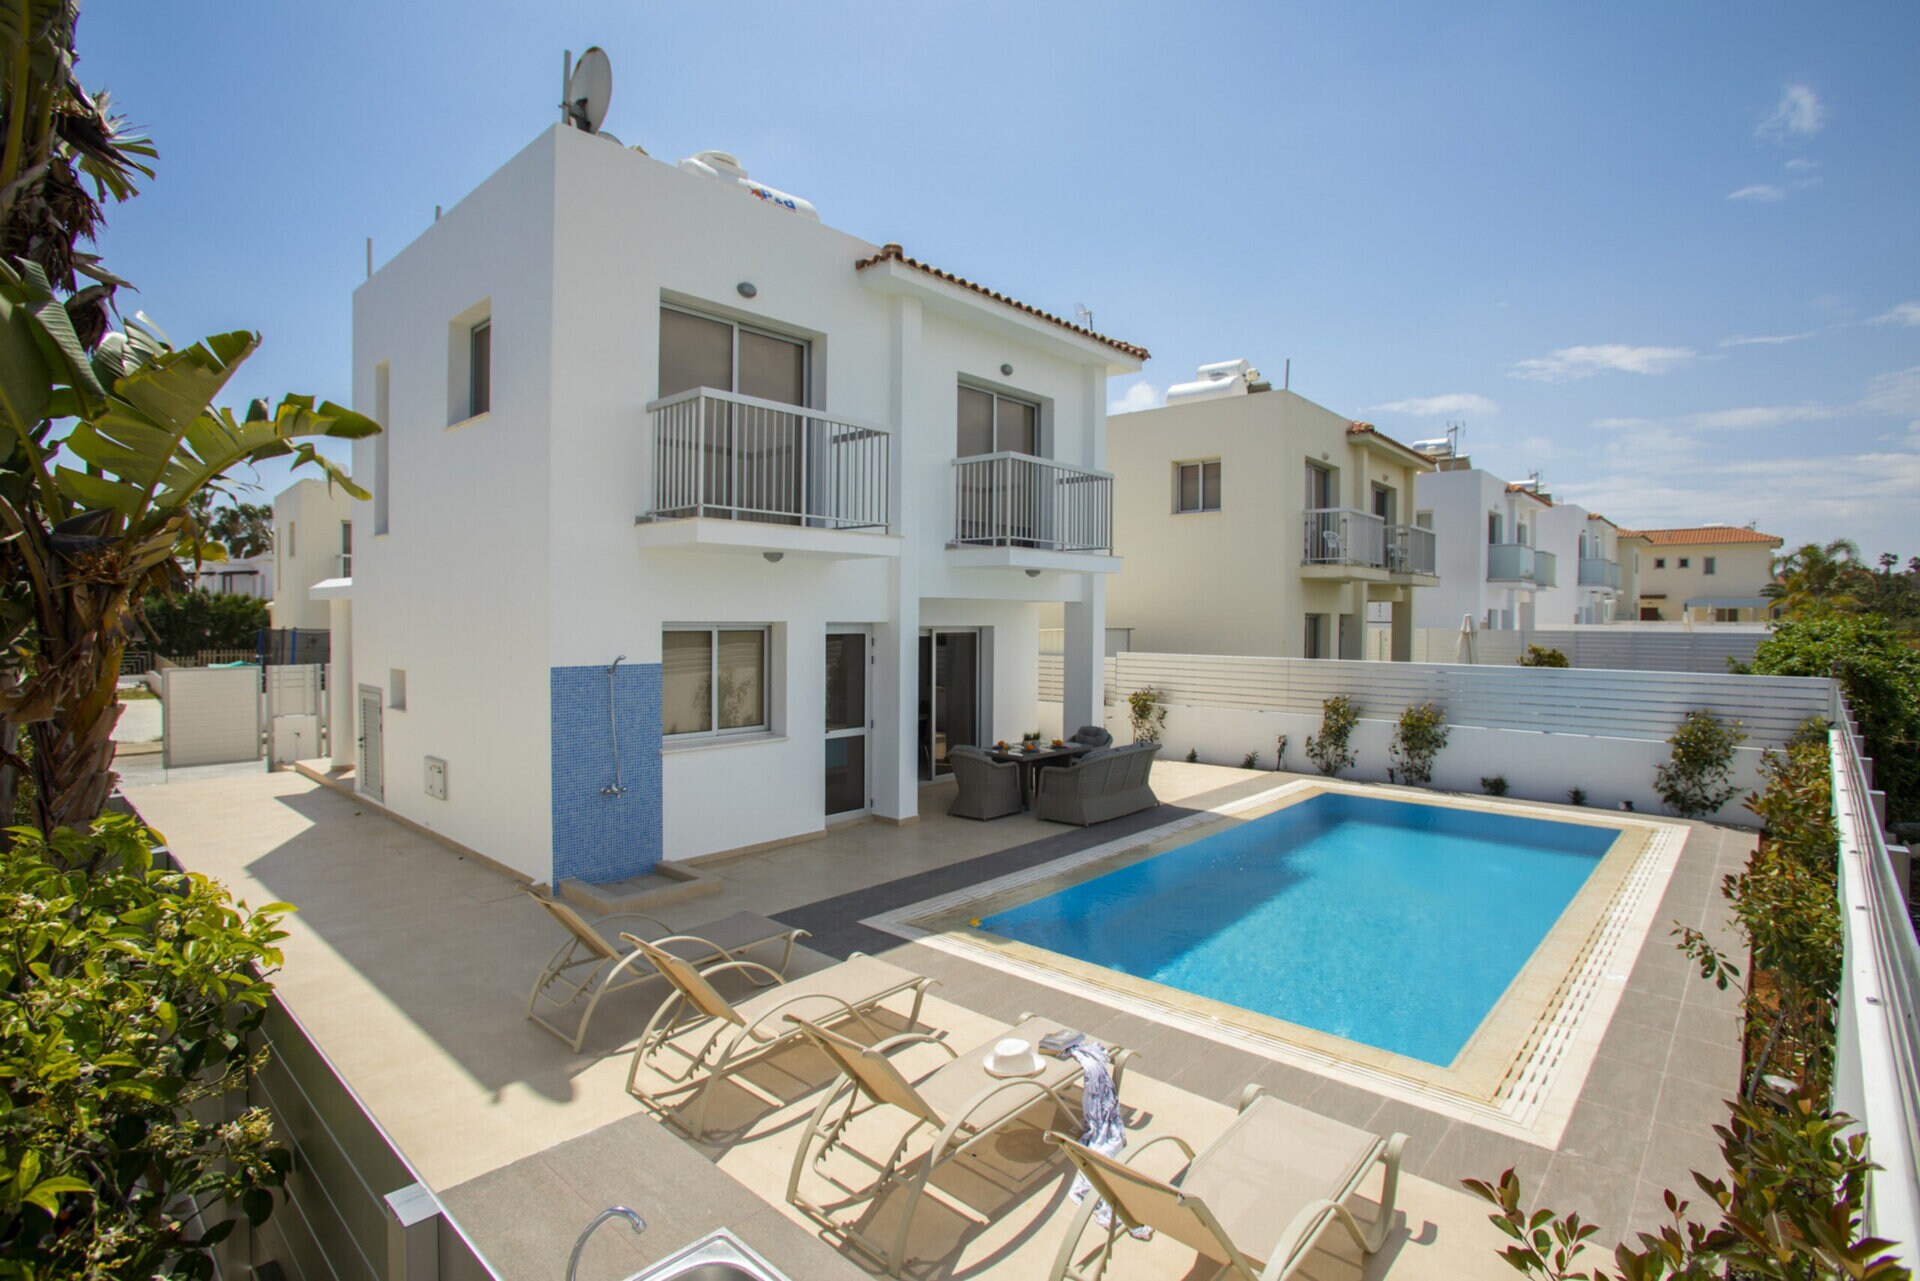 Property Image 2 - Imagine You and Your Family Renting this Luxury Villa minutes from the Beach, Protaras Villa 1470